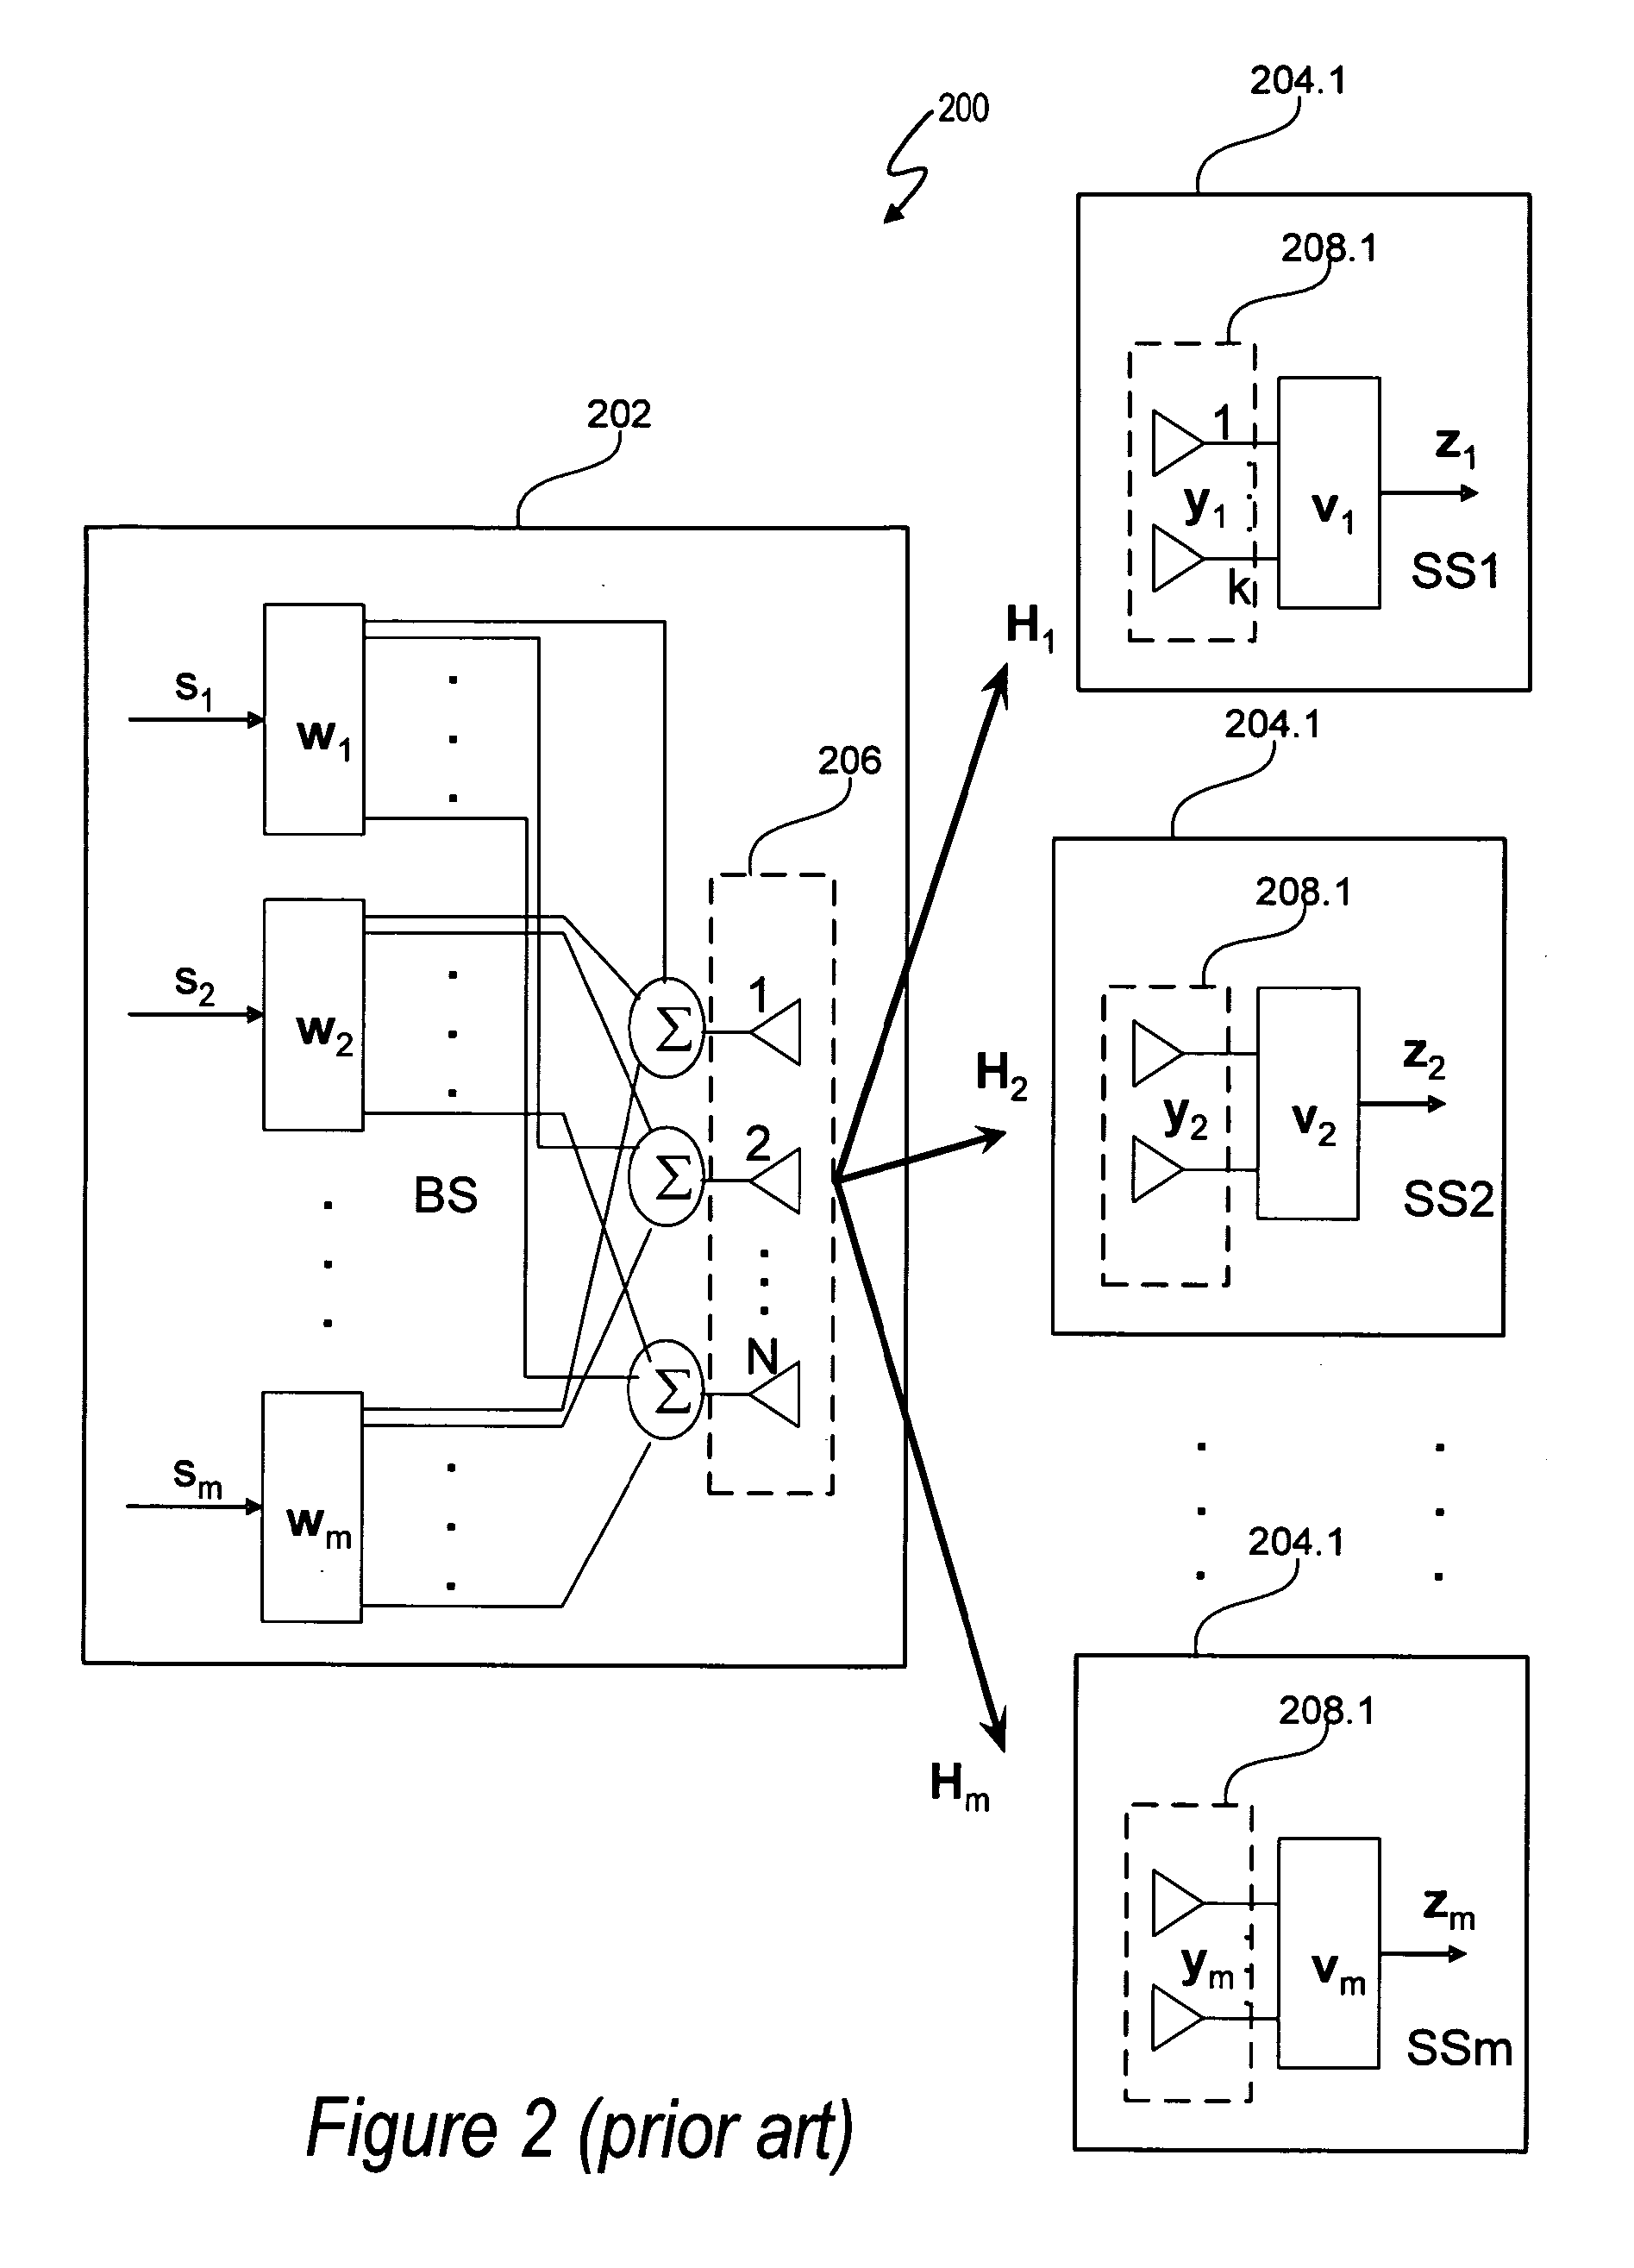 Beamforming for Non-Collaborative, Space Division Multiple Access Systems